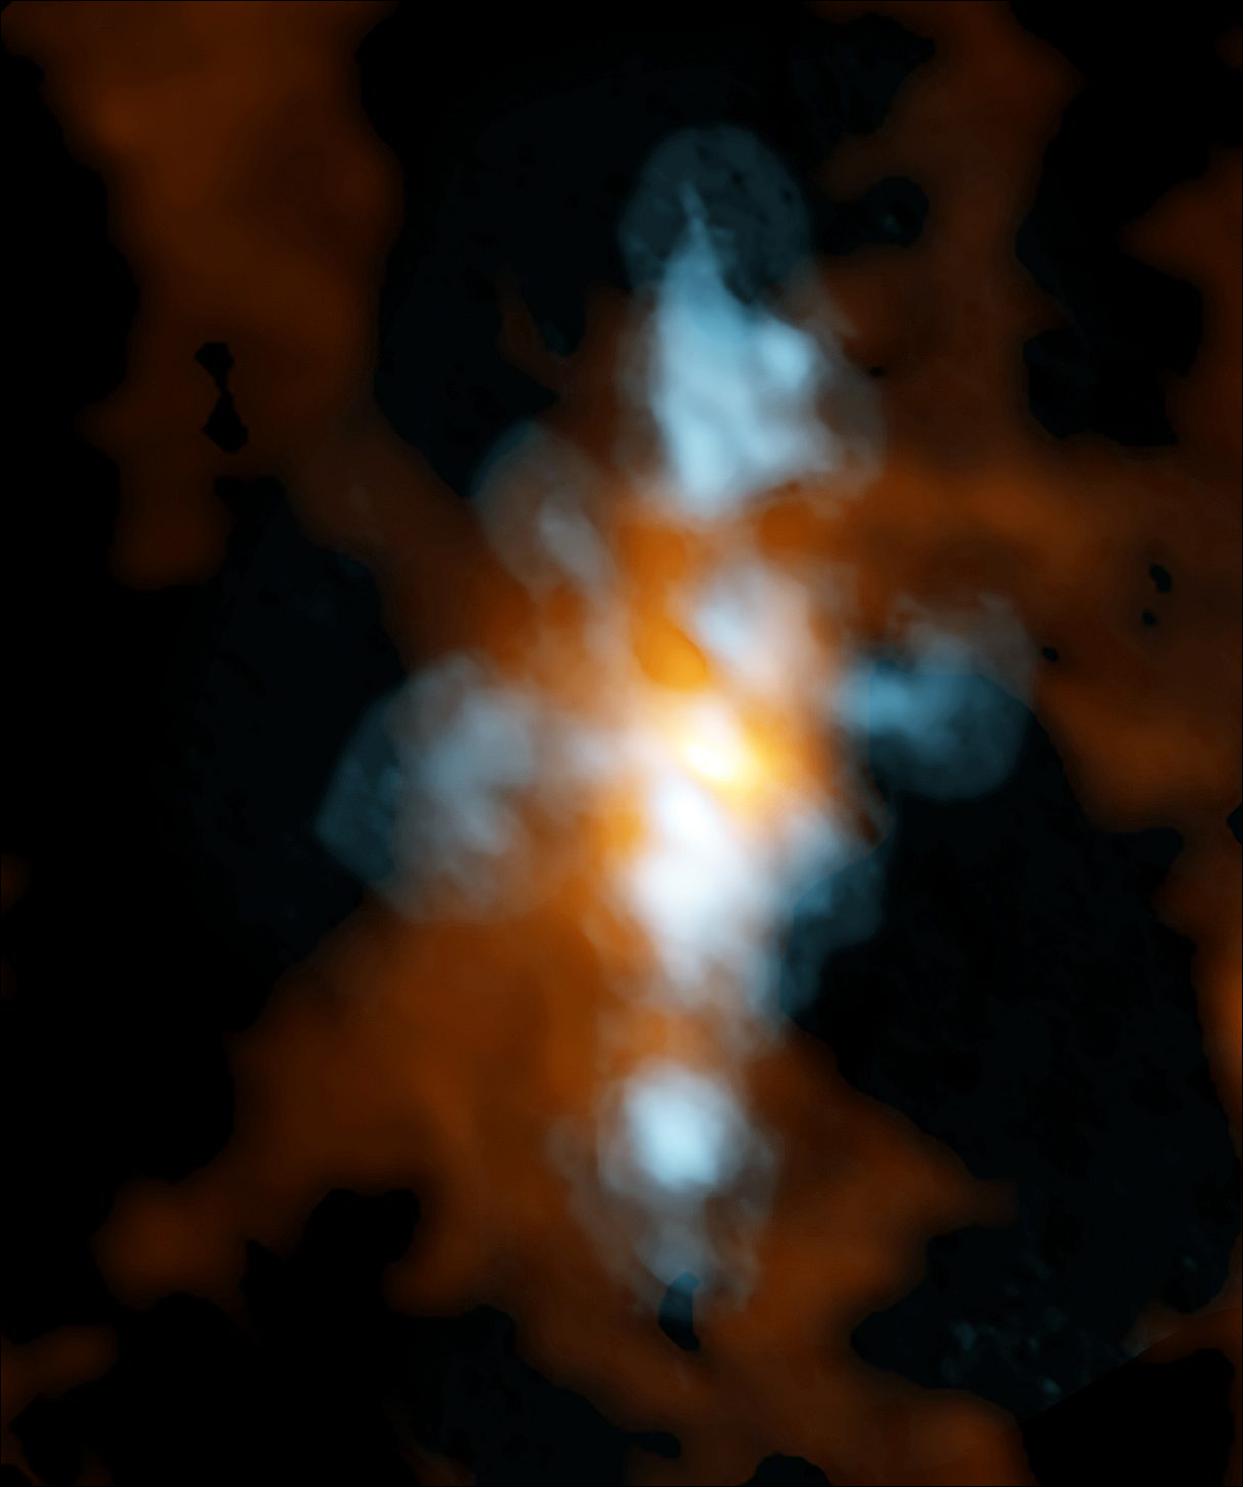 Figure 59: Composite ALMA image of NGC 6334I, a star-forming region in the Cat's Paw Nebula, taken with the Band 10 receivers, ALMA's highest-frequency vision. The blue component is heavy water (HDO) streaming away from either a single protostar or a small cluster of protostars. The orange region is the "continuum emission" in the same region, which scientists found is extraordinarily rich in molecular fingerprints, including glycolaldehyde , the simplest sugar-related molecule (image credit: ALMA (ESO/NAOJ/NRAO): NRAO/AUI/NSF, B. Saxton)